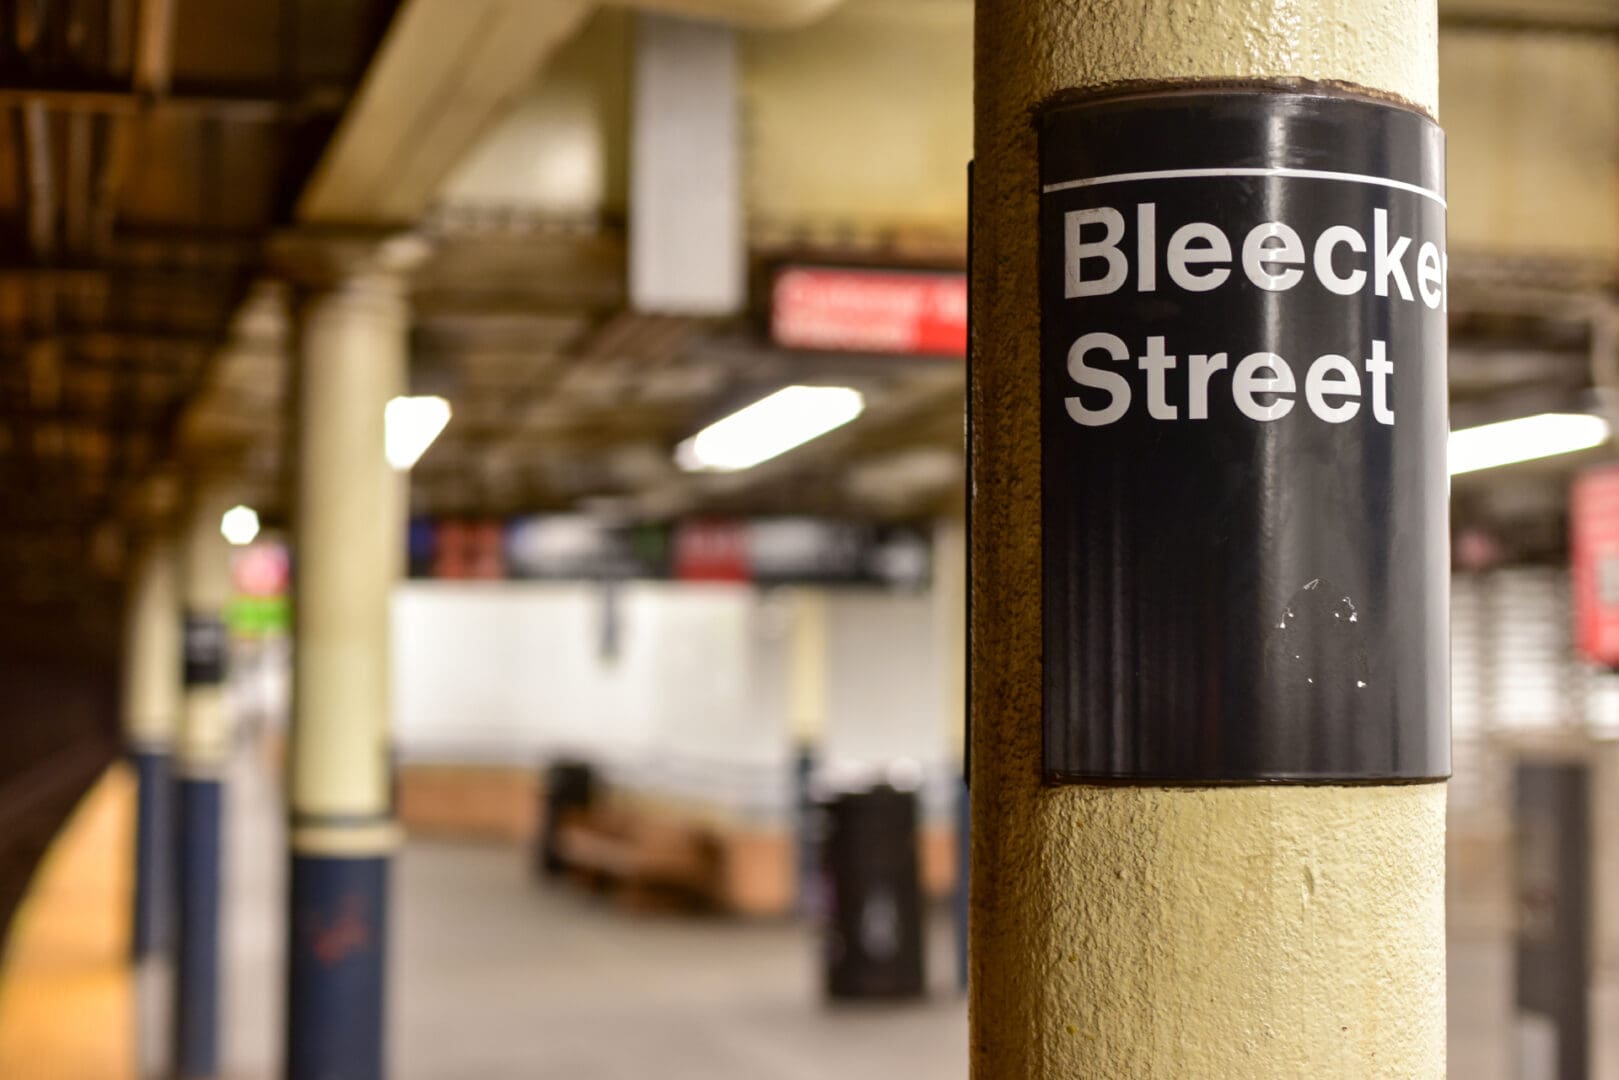 A bleecker street sign on a column in a subway station, with softly focused platform and benches in the background.